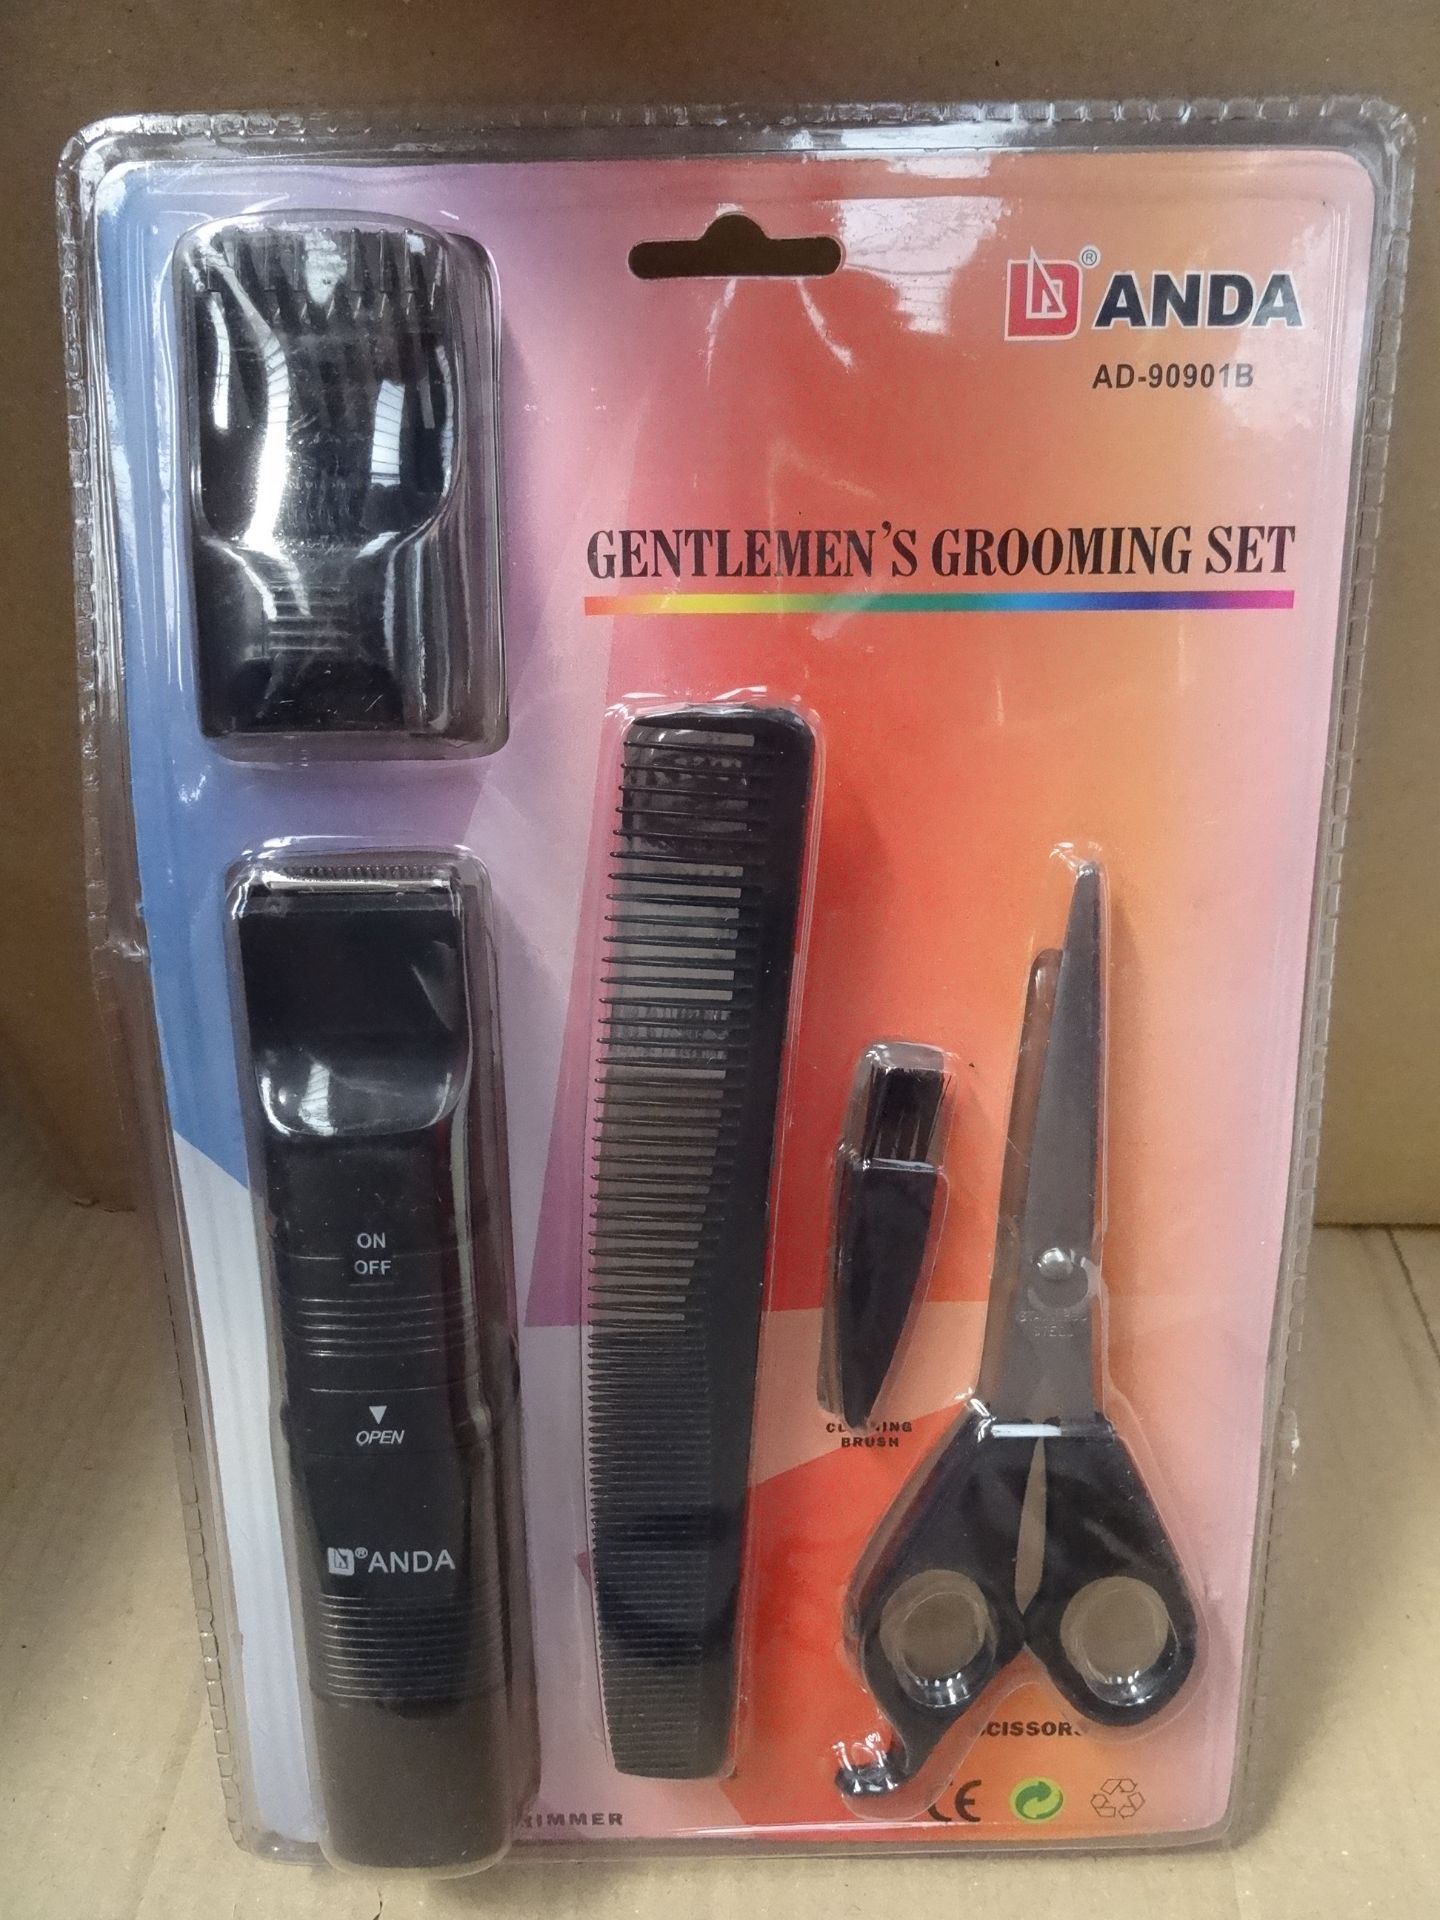 10 x Anda Gentlemens Grooming Sets. Brand new and Packaged. Includes: Beard & Hair Trimmer, Comb,